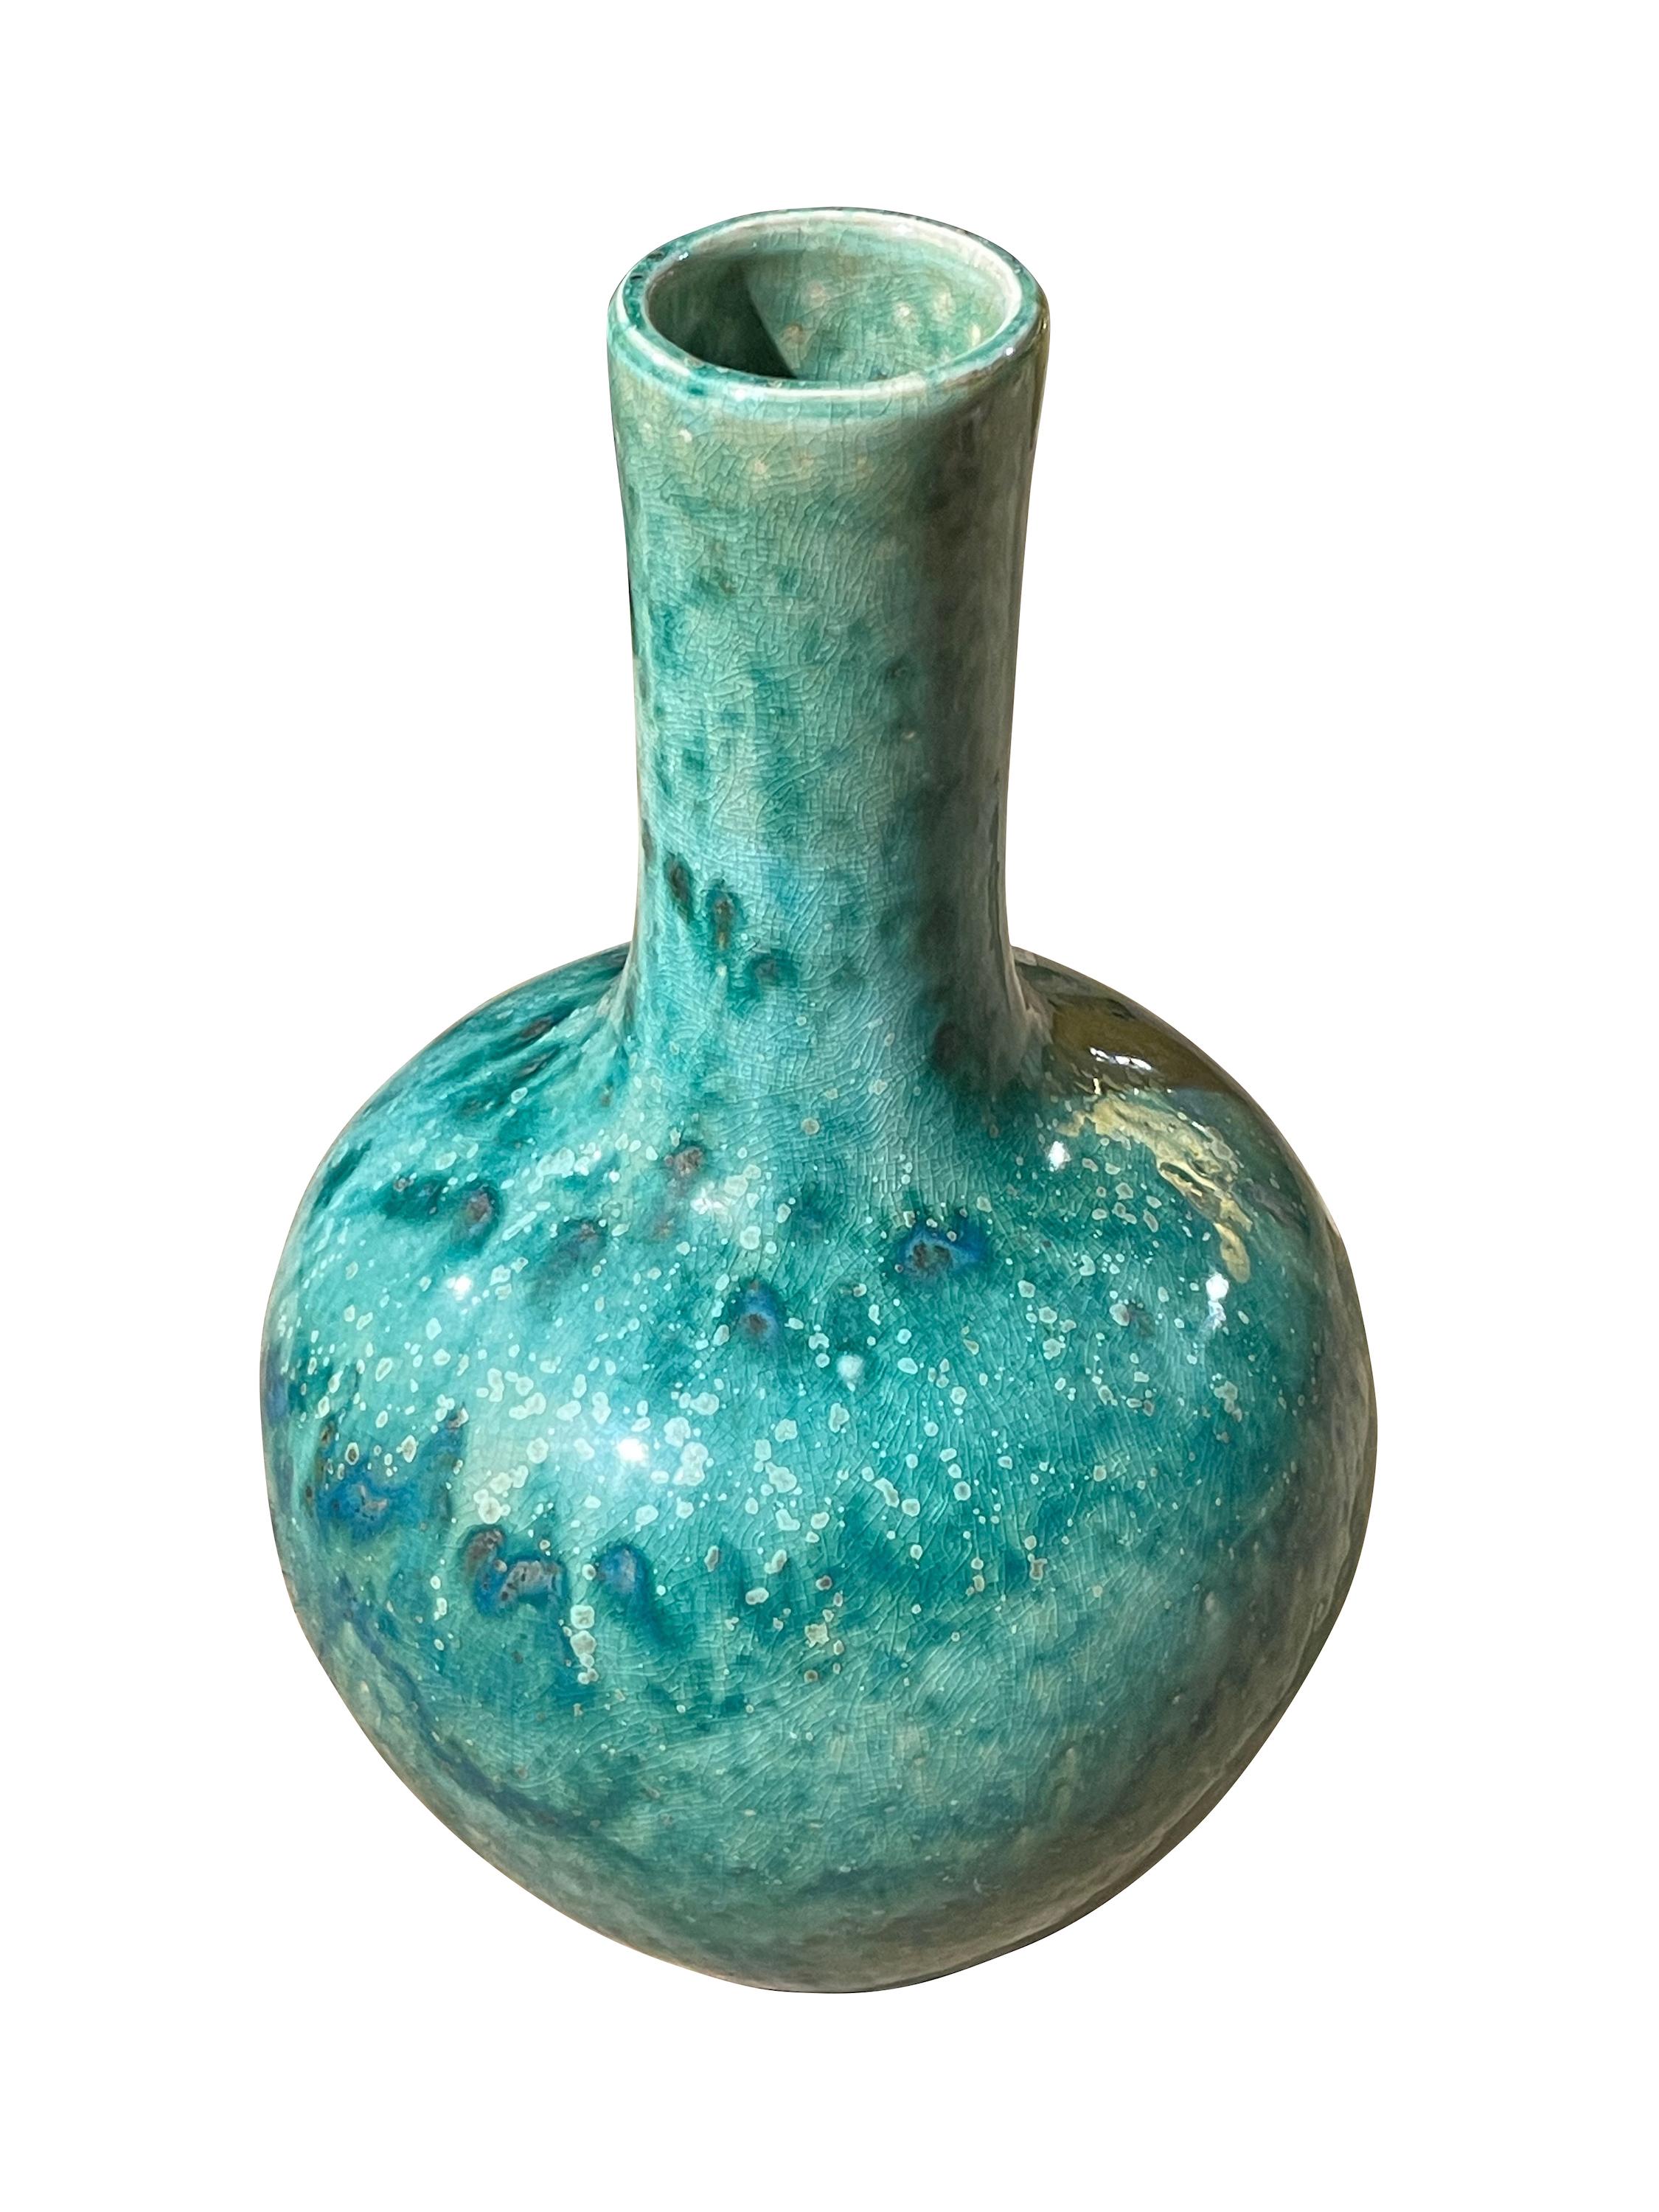 Contemporary Chinese mottled turquoise coloring with crackle glaze vase.
Funnel neck design.
From a large collection of different sizes and shapes.
ARRIVING MARCH